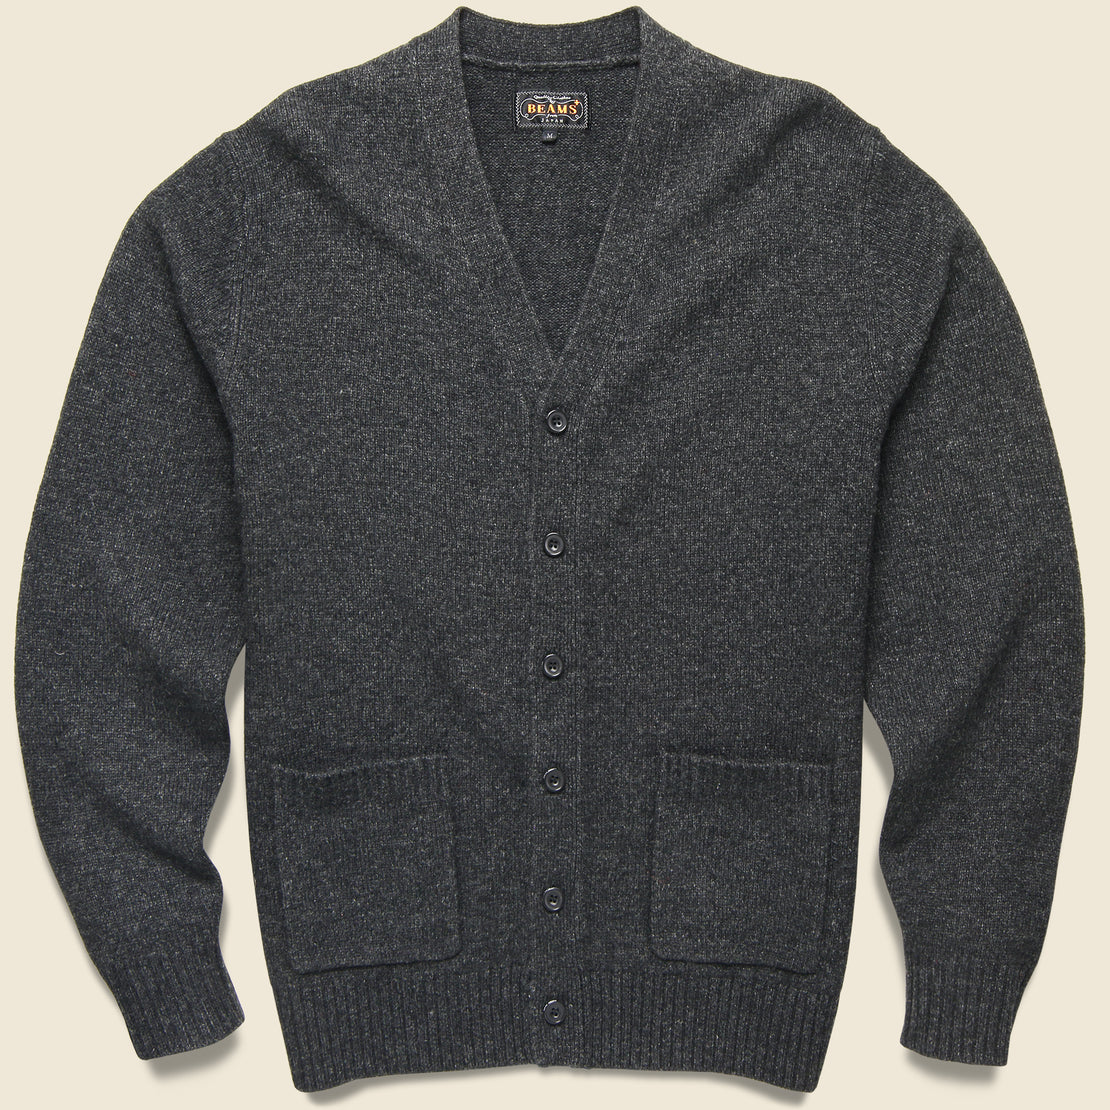 BEAMS+ Elbow Patch Cardigan - Charcoal